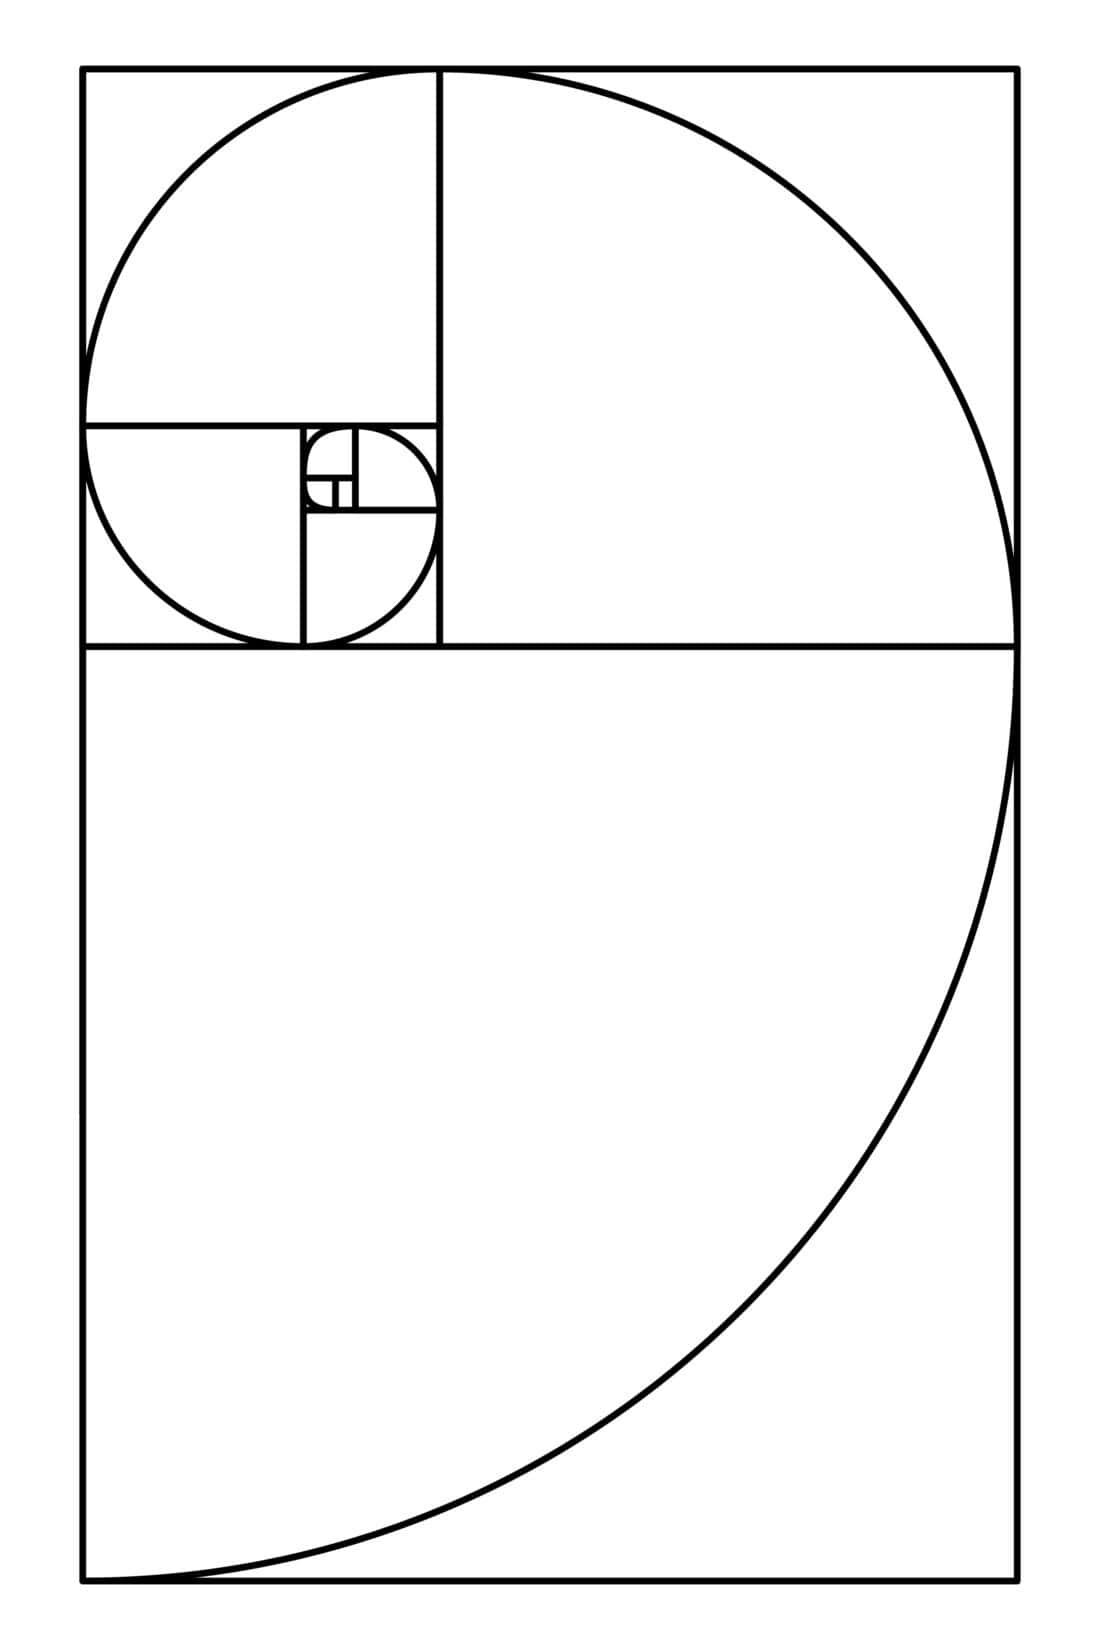 A black-and-white illustration of a golden spiral overlaying a series of progressively smaller rectangles and quarter circles, demonstrating the Fibonacci sequence. The spiral, reminiscent of the calm found in a backyard yoga space, starts from the center and expands outward, maintaining precise proportions.